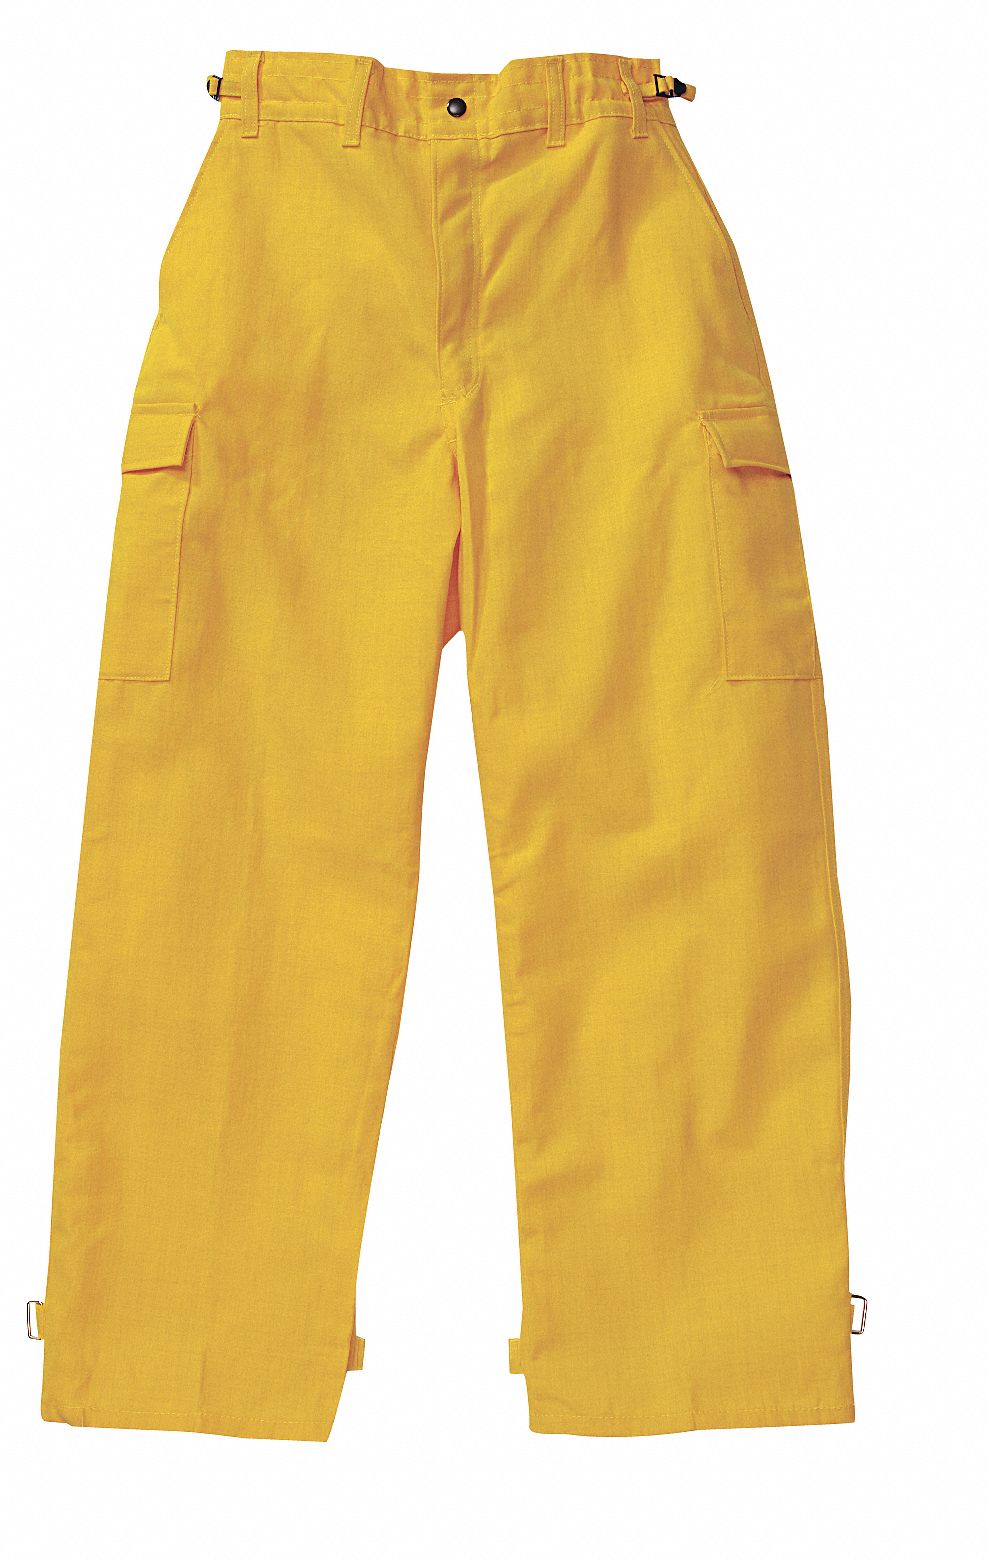 Wildland Fire Over Pants: 2XL, 43 to 47 in Fits Waist Size, 34 in Inseam, Yellow